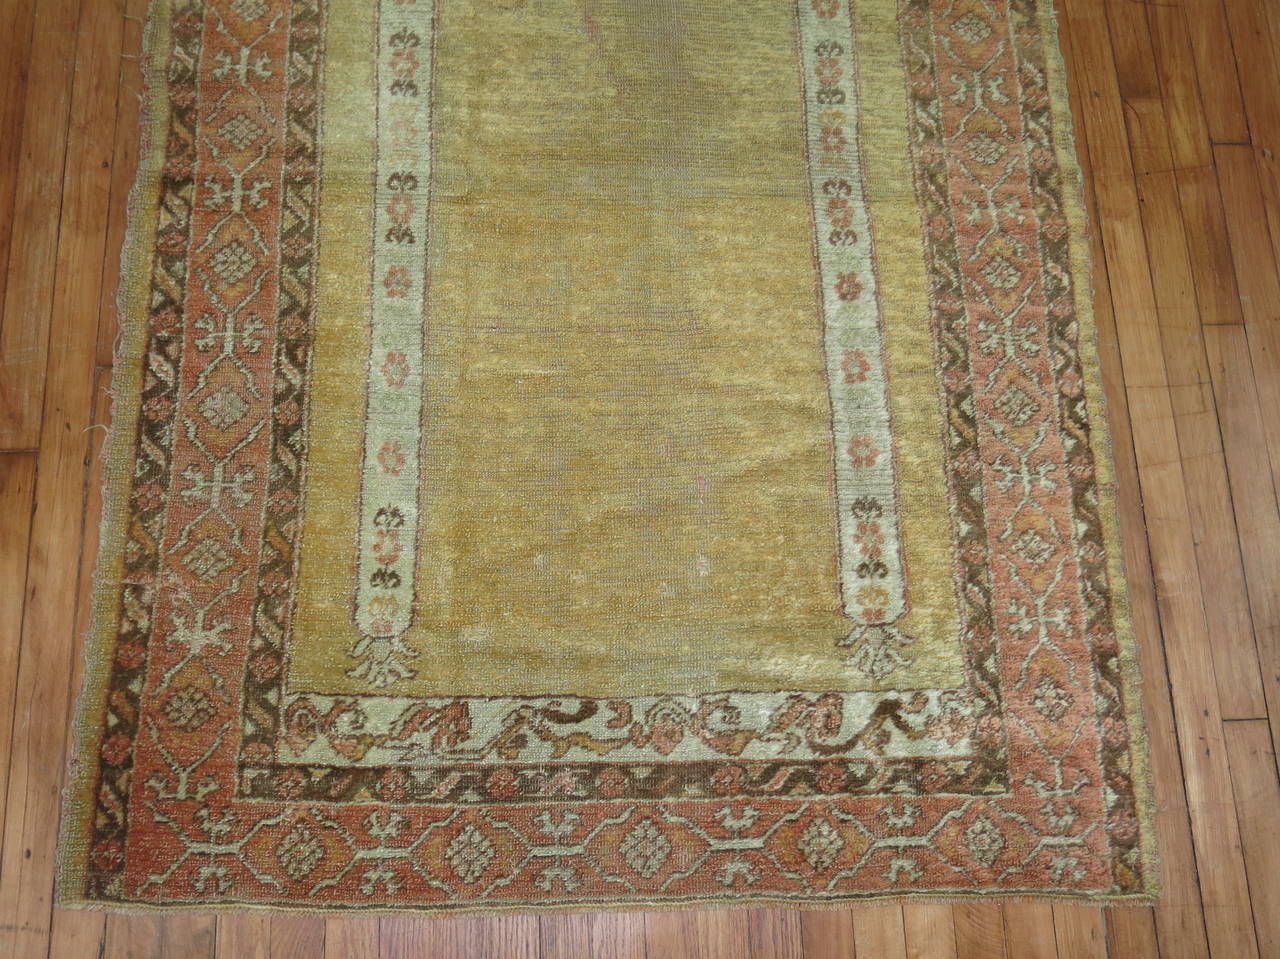 Late 19th century angora wool Turkish Oushak. The field is a soft yellow. The border is a melon color. 

Measures: 4' x 5'9